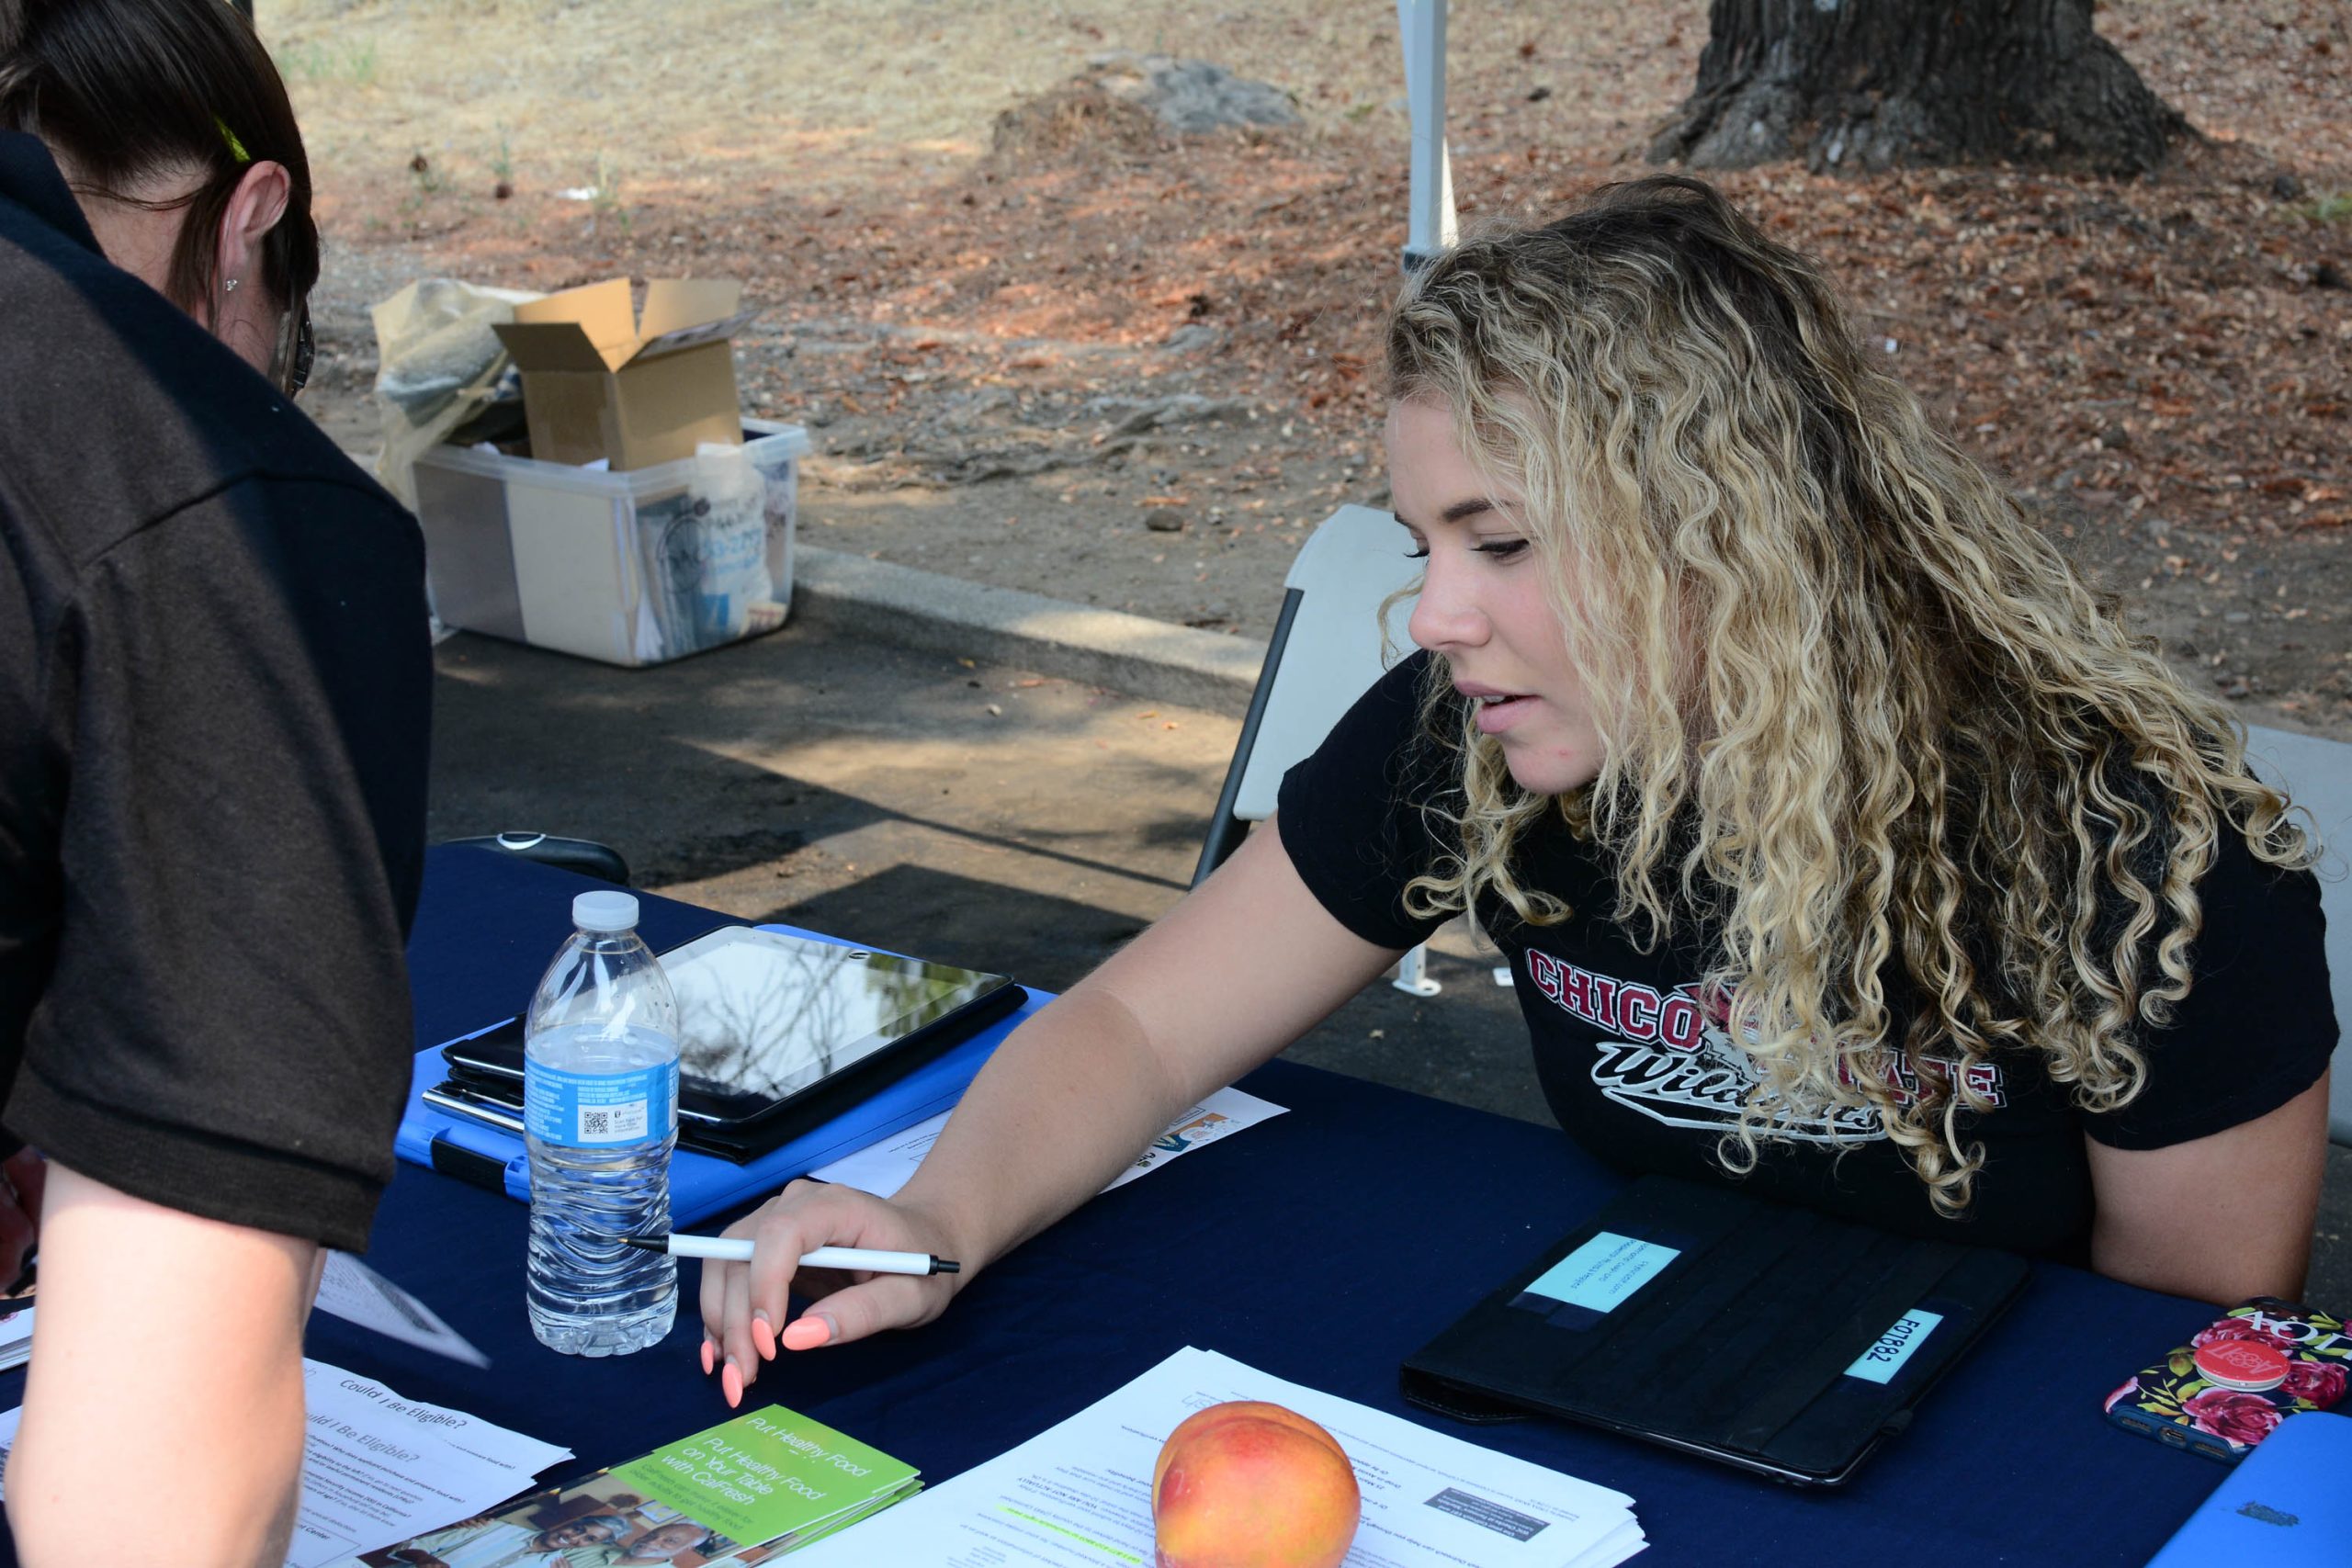 A student getting help with money for food at California State University Chico.